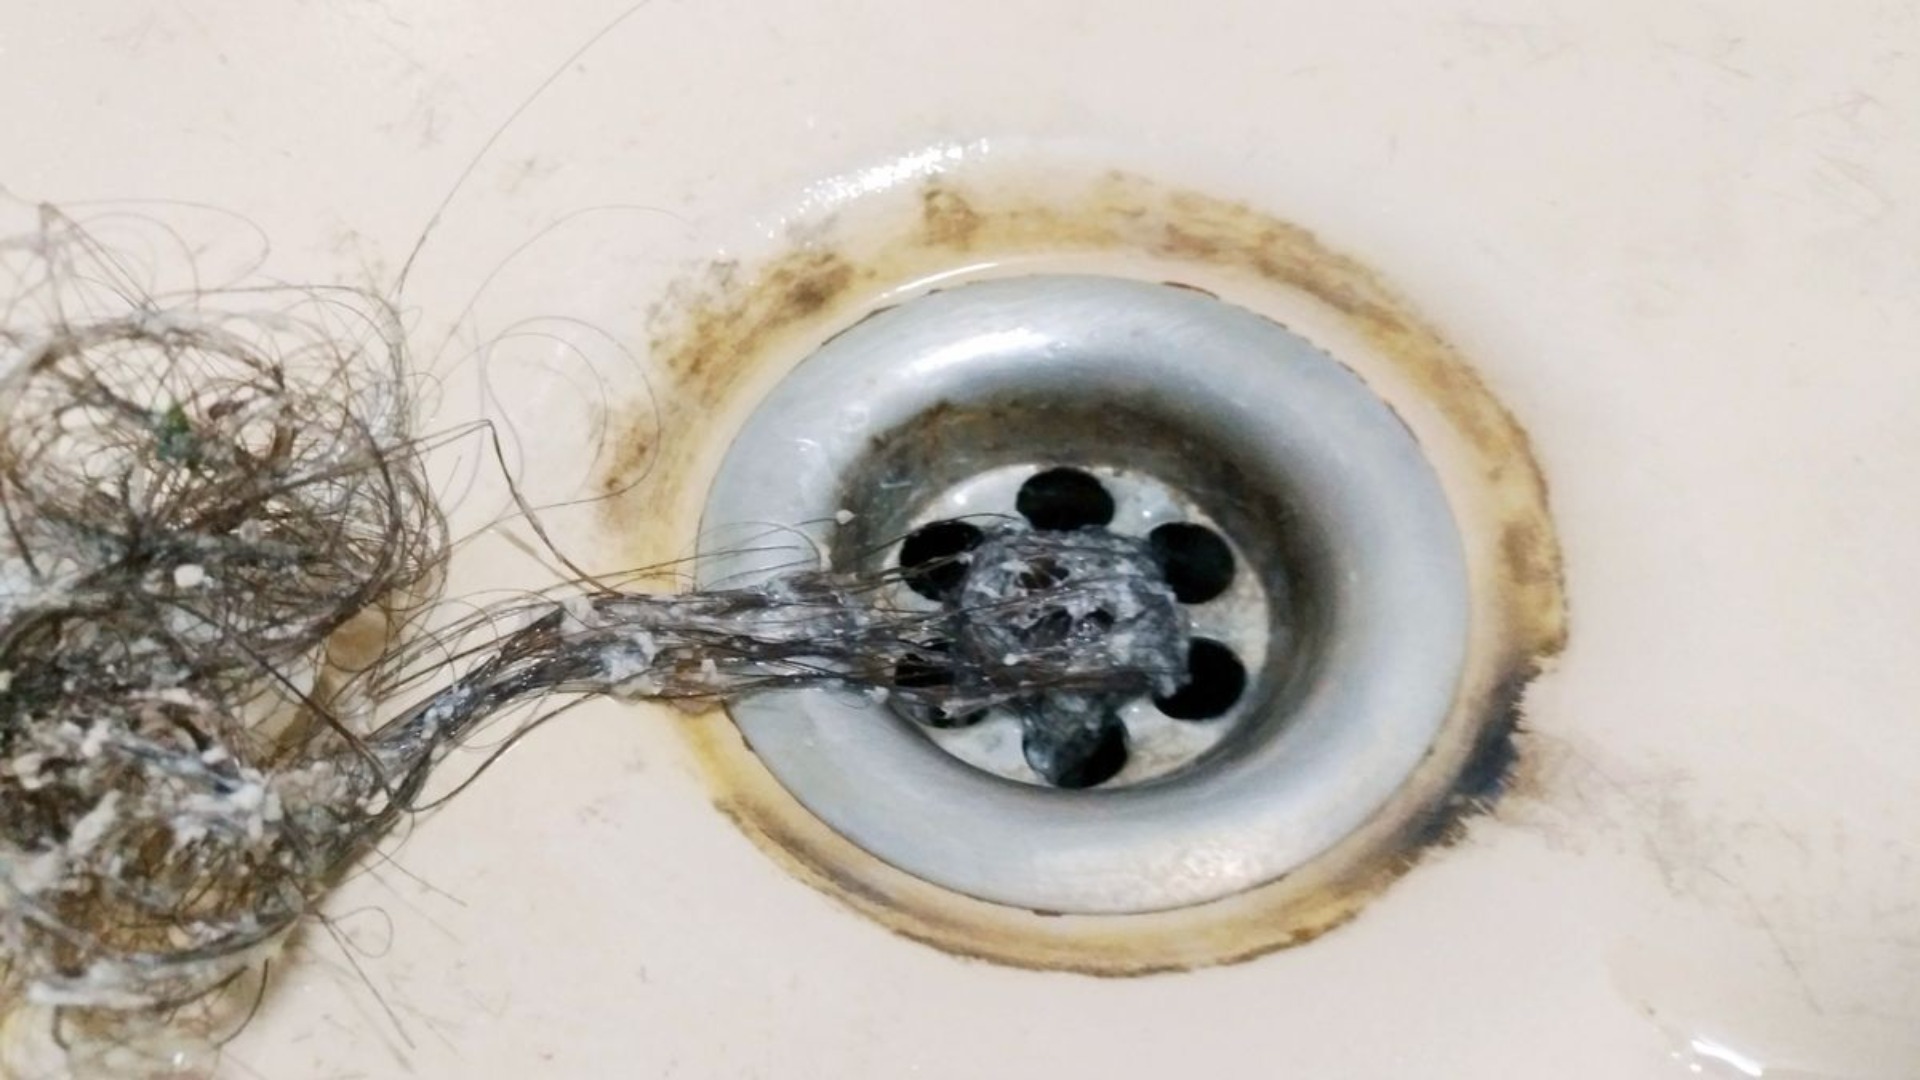 Hair Pulled From Drain